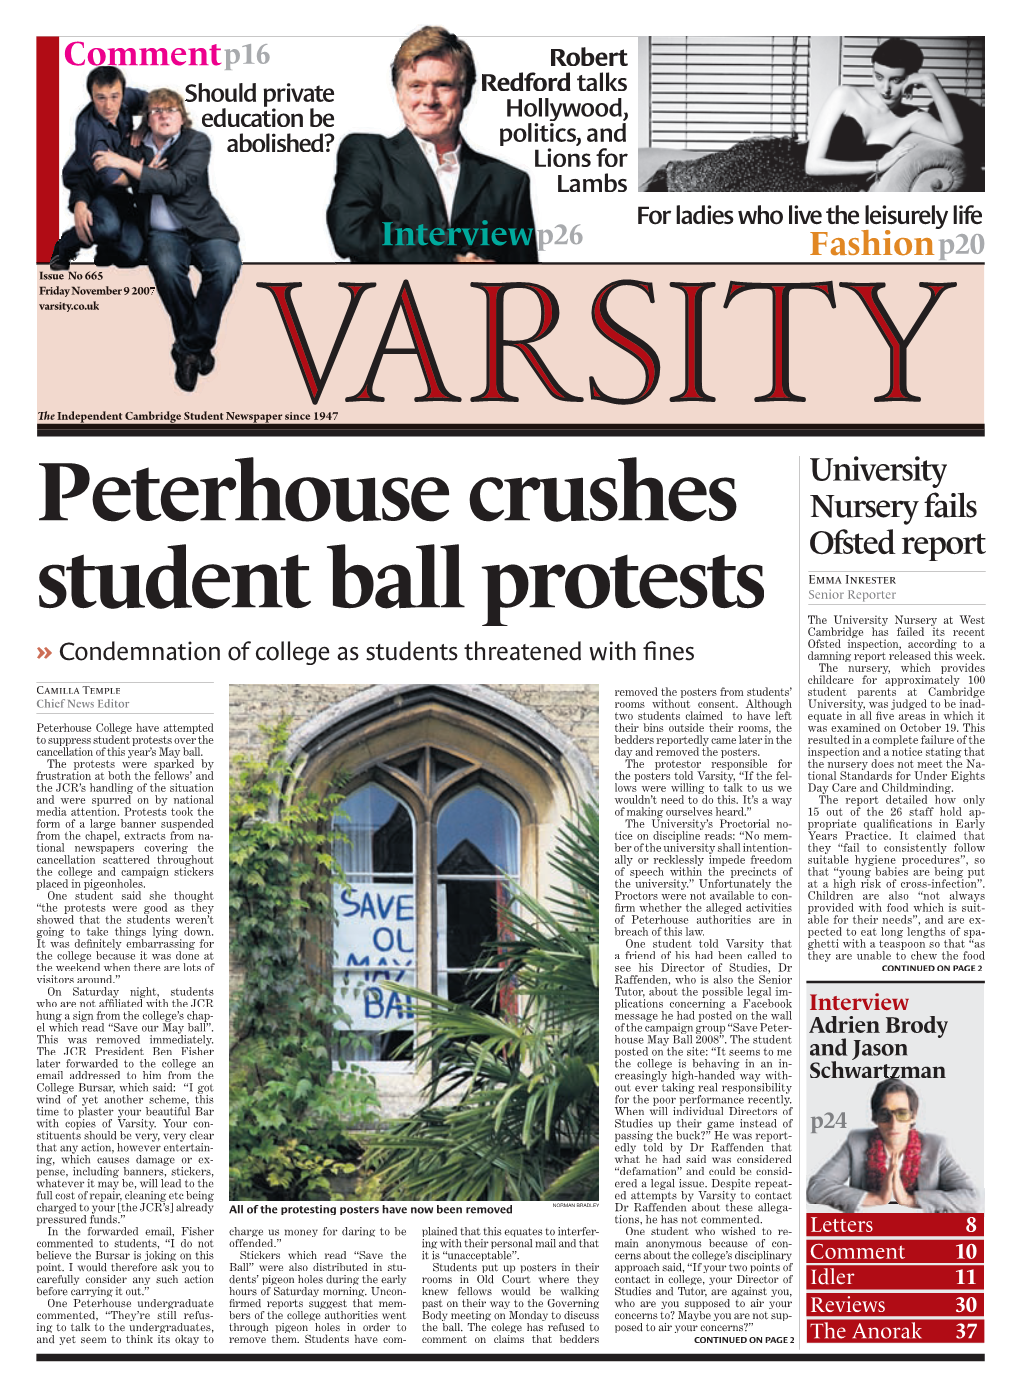 Peterhouse Crushes Student Ball Protests